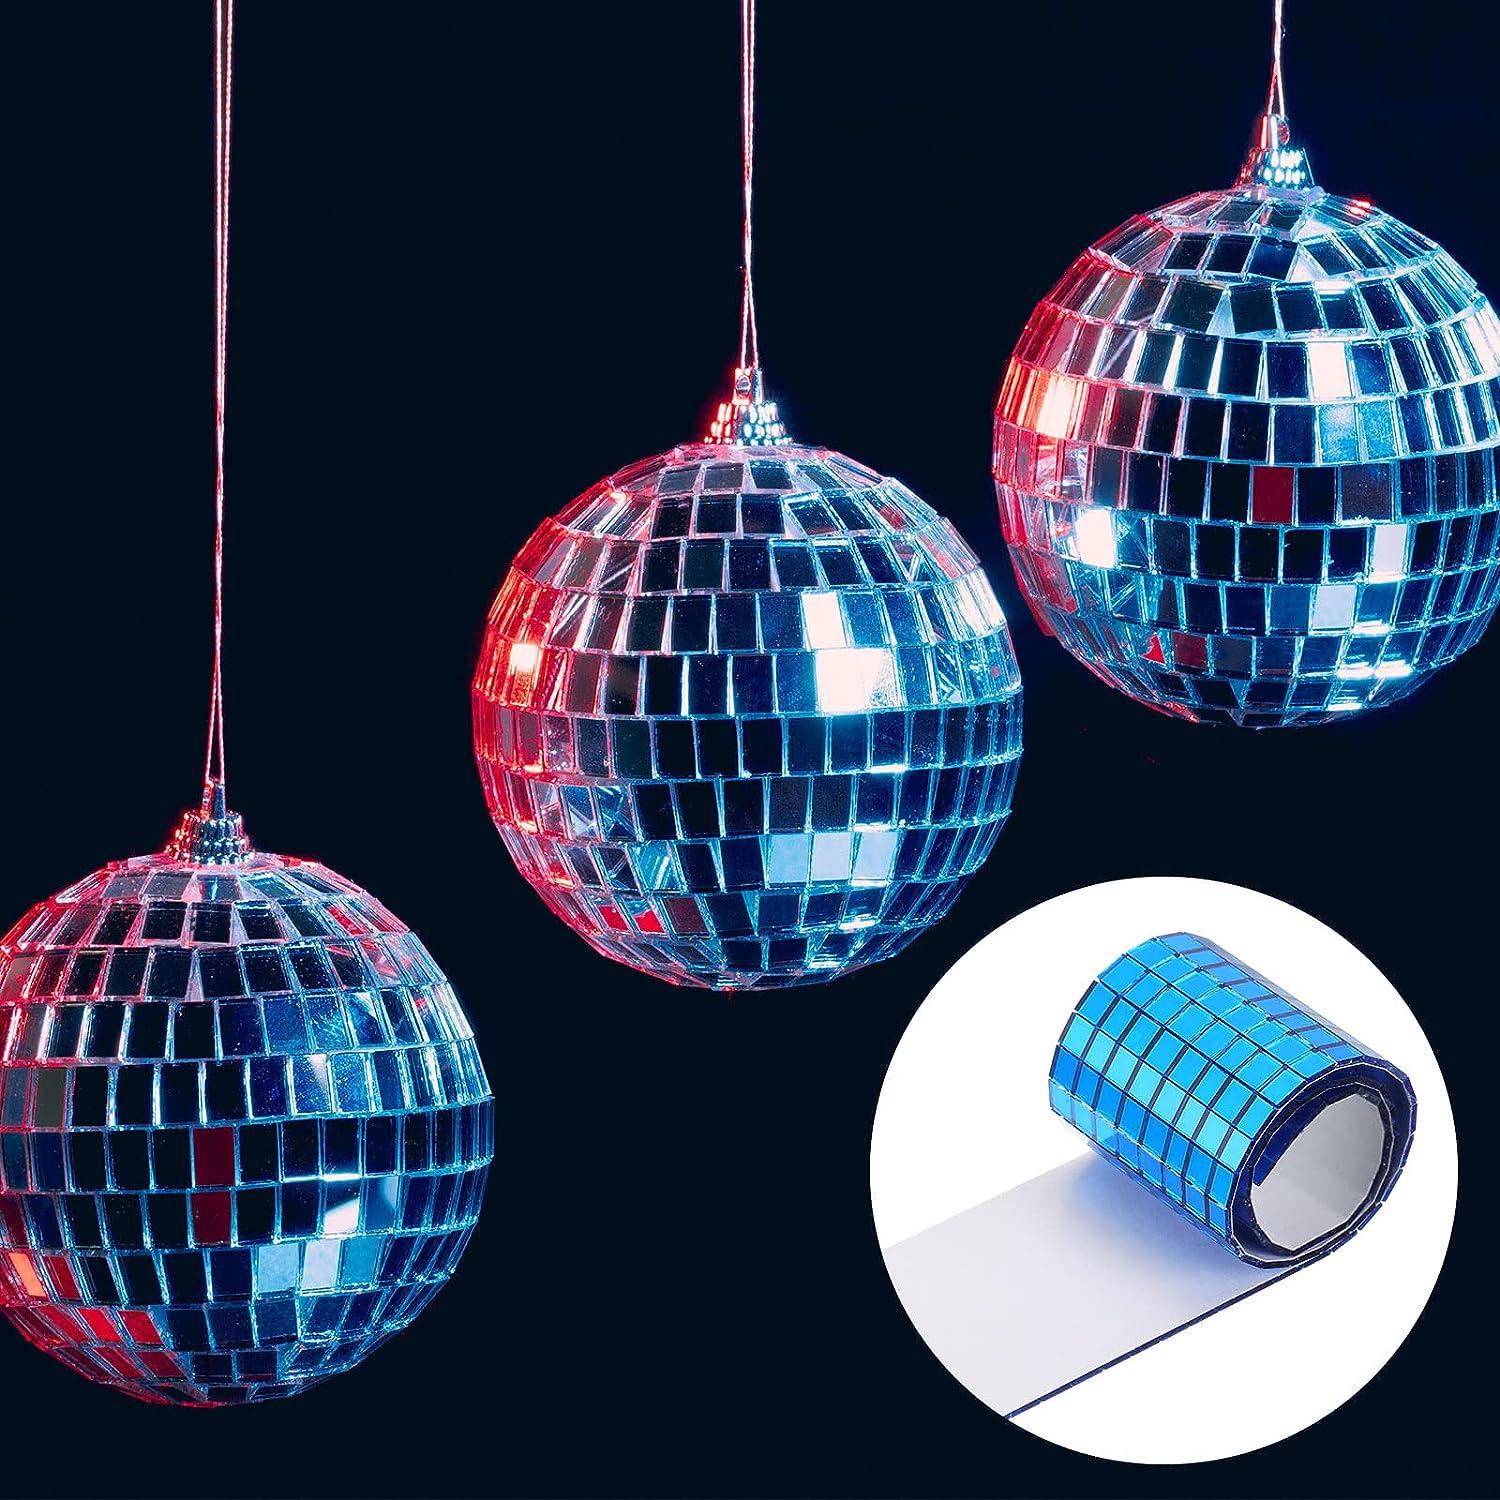 PP OPOUNT 2160 PCS Disco Ball Tiles, Self-Adhesive Mirror Tiles for Crafts,  Small Mirror Mosaics Tiles for Indoor Decoration, DIY Disco Balls, Vases,  Cups, Photo Frames (5 x 5 mm) 